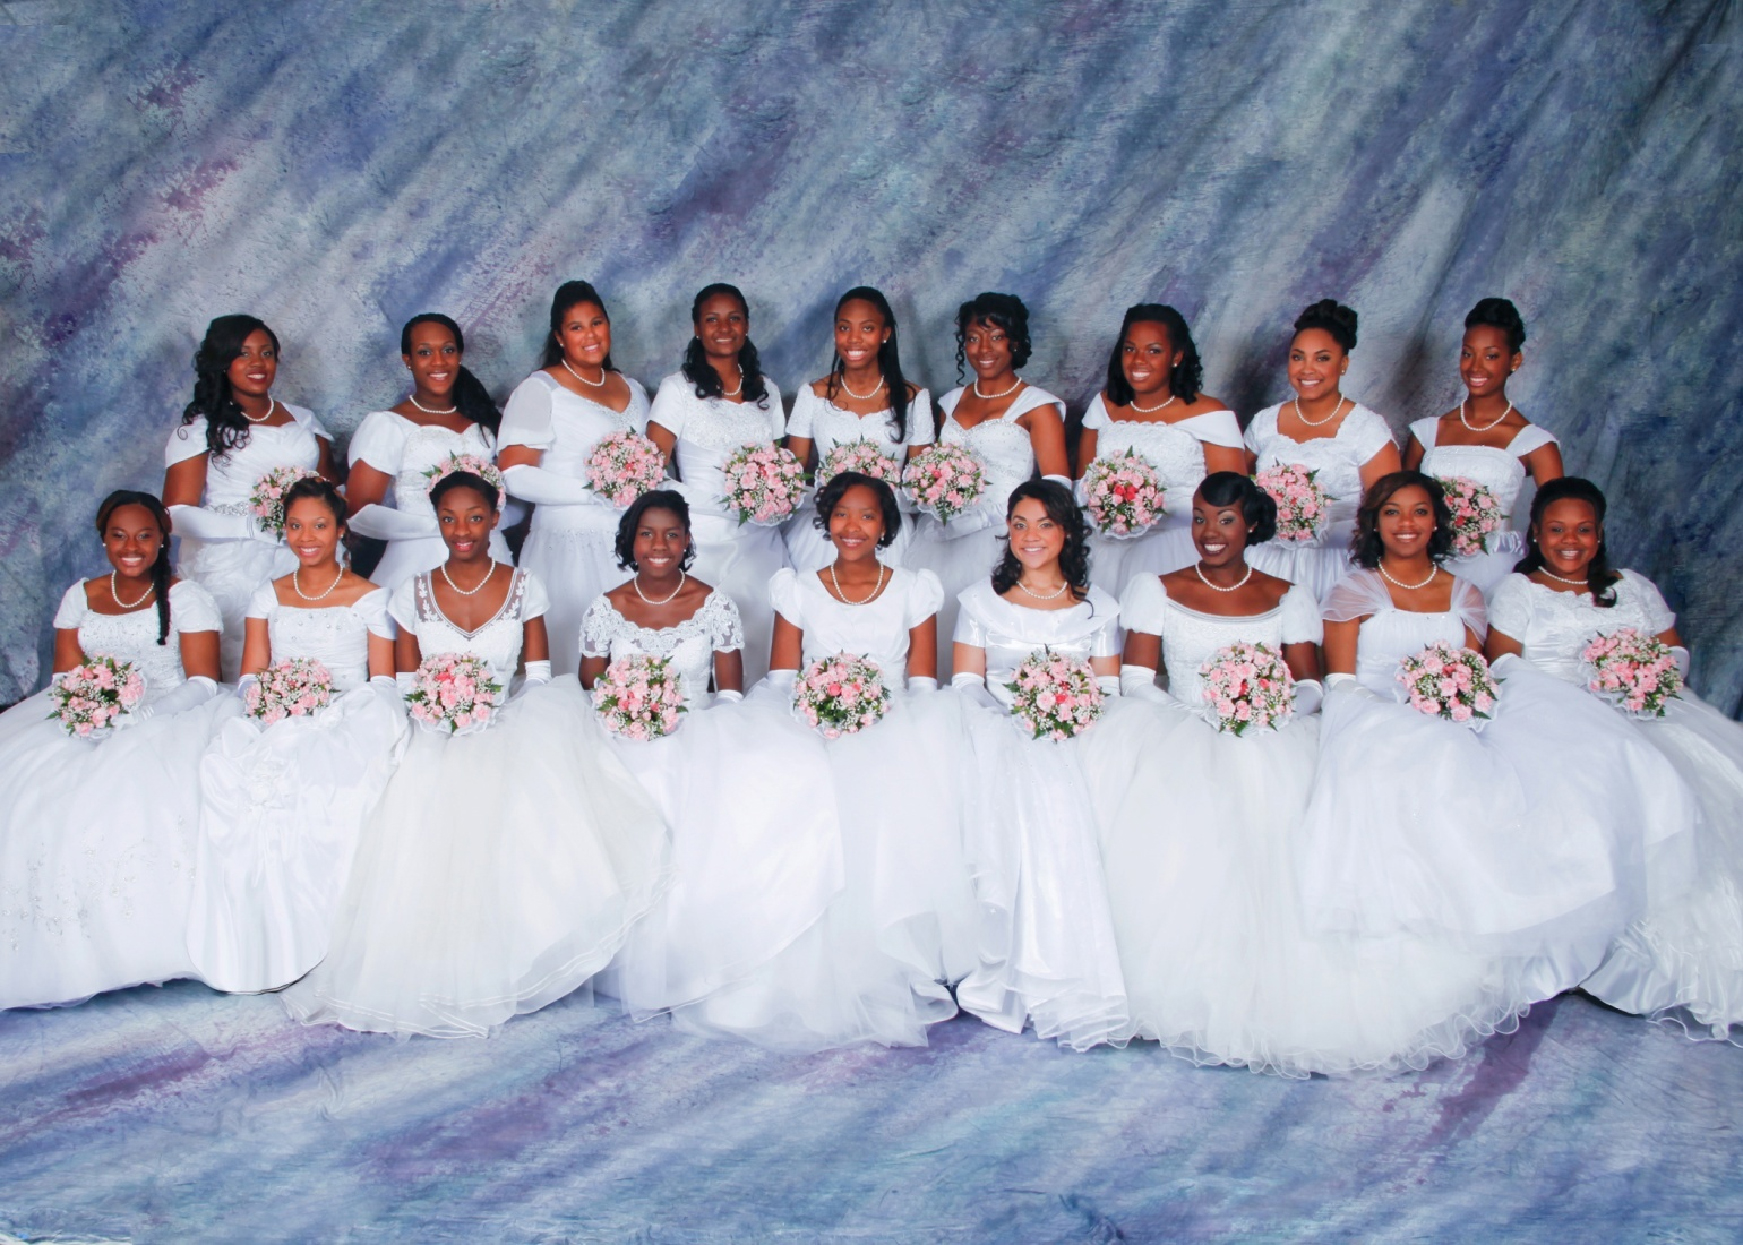 The Epsilon Xi Omega Chapter of the Alpha Kappa Alpha Sorority, Inc. is Now Accepting Debutante Applications